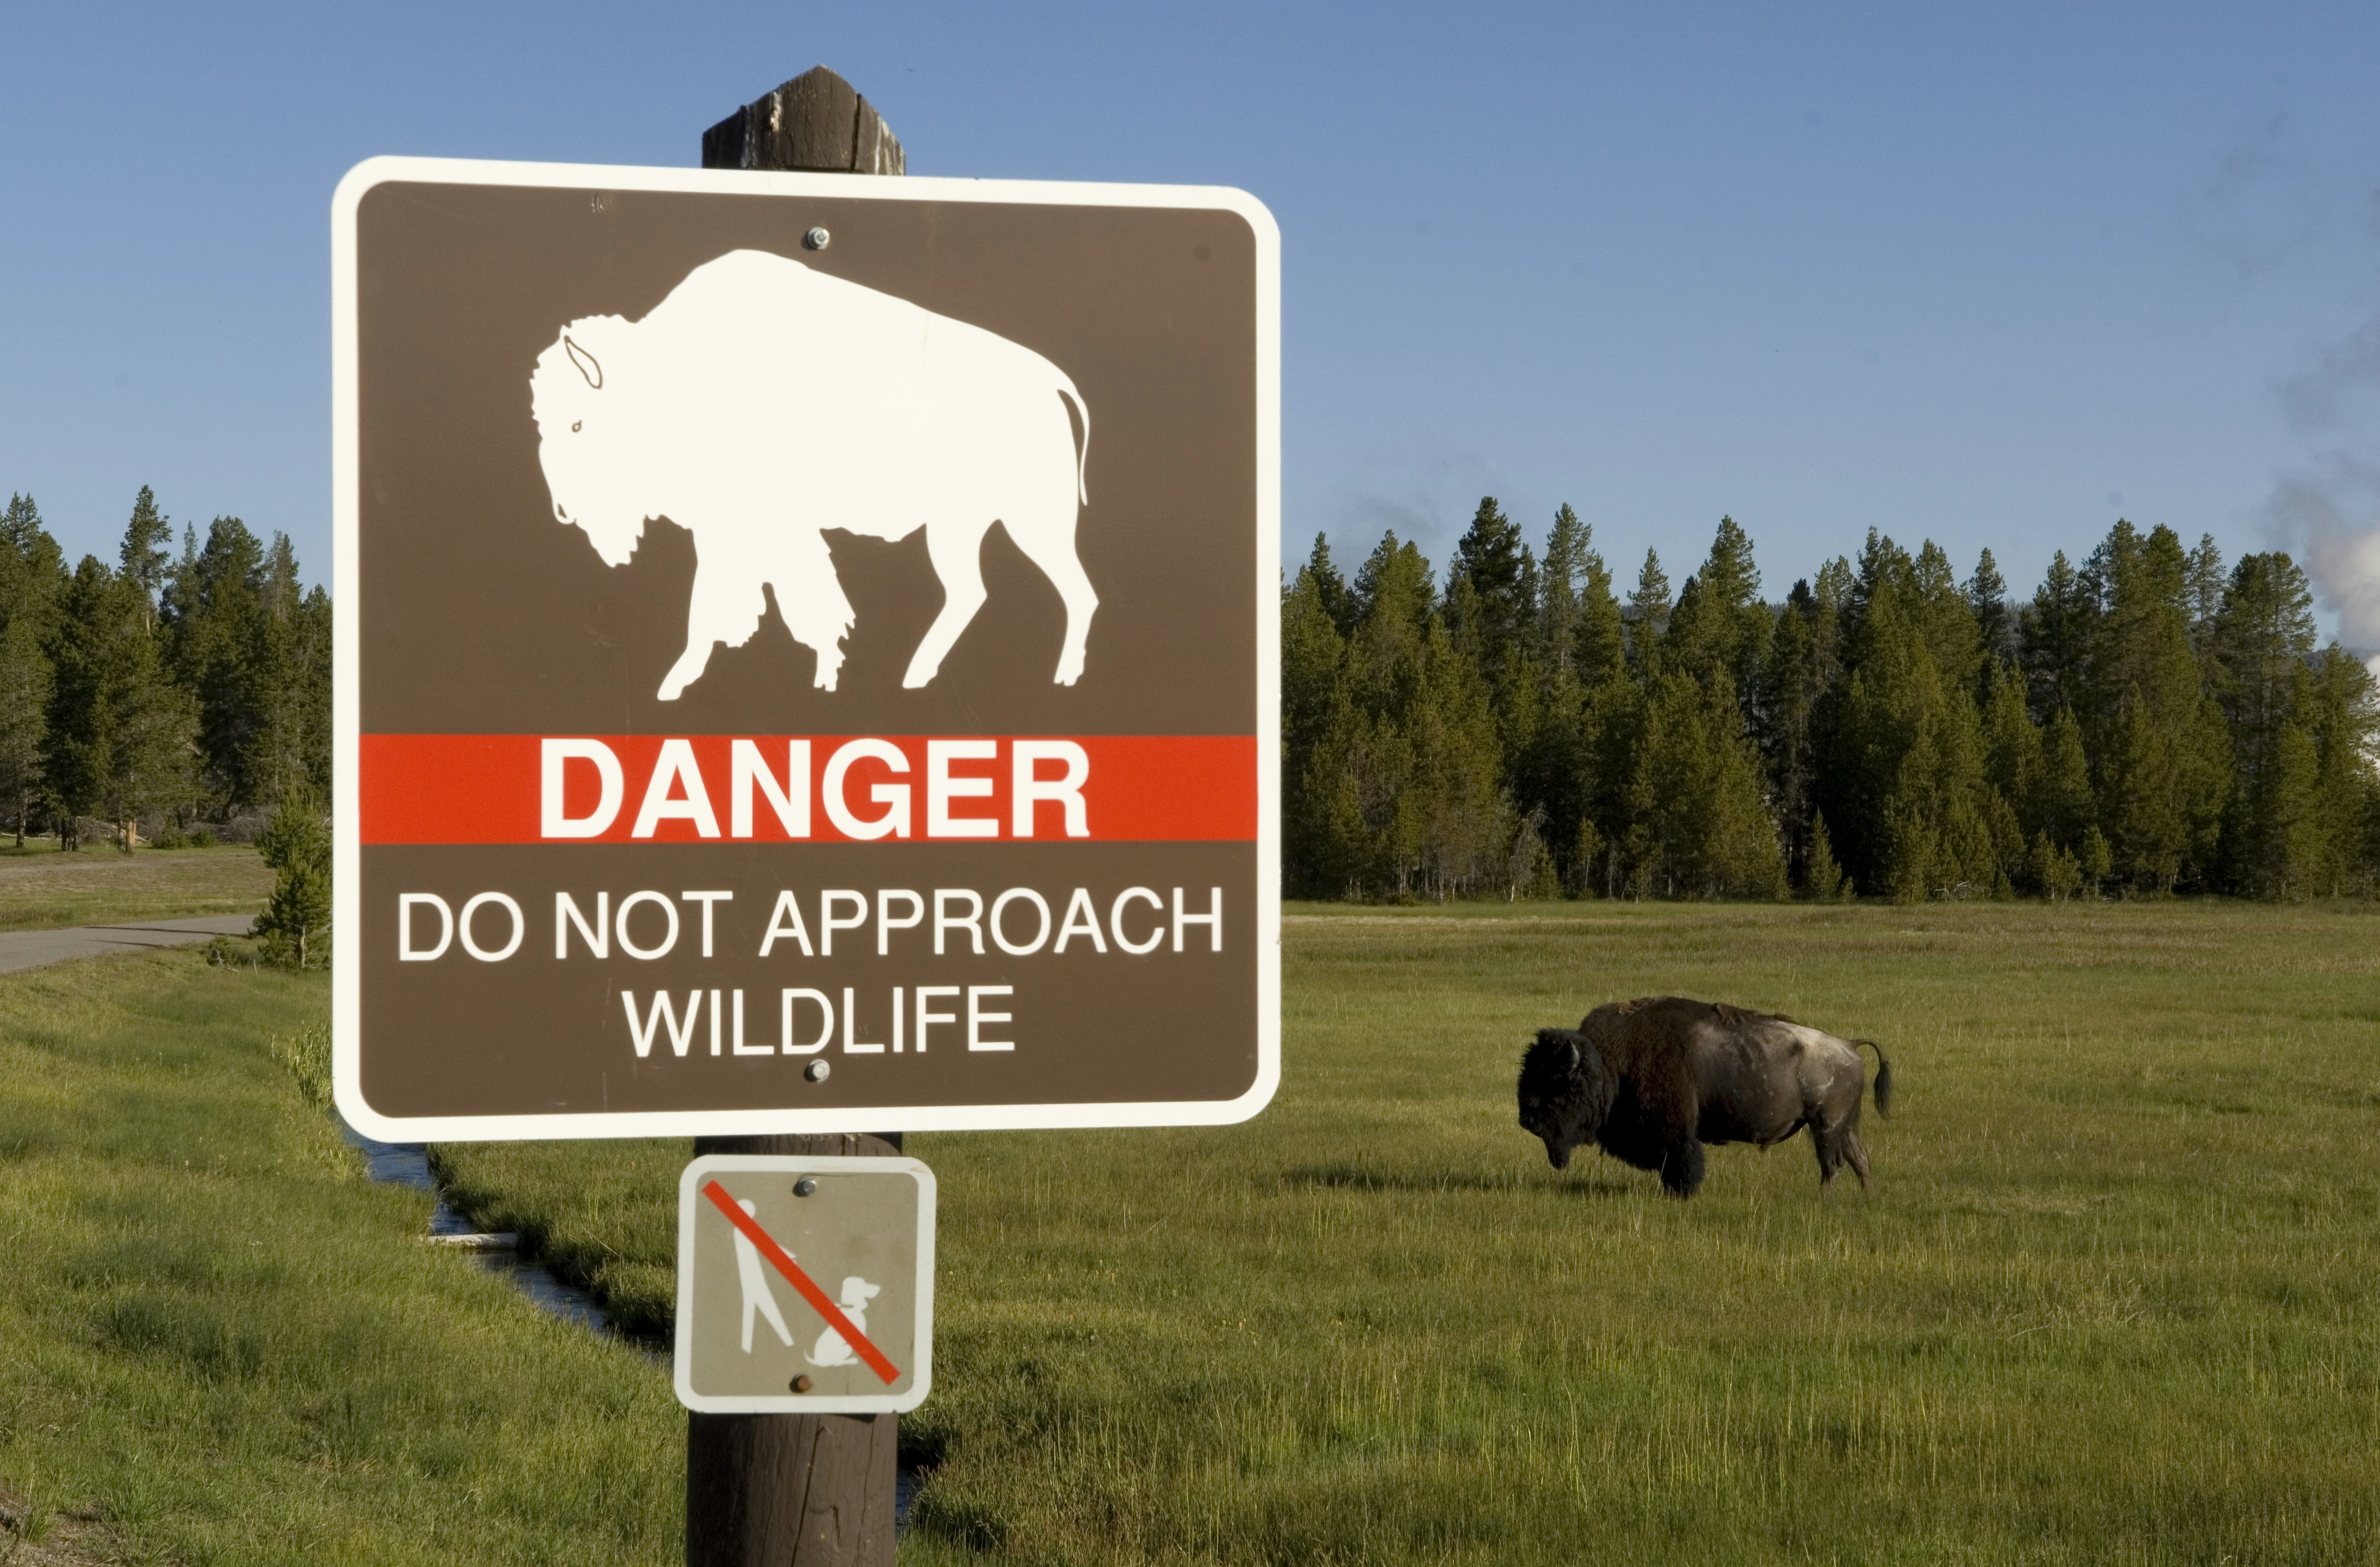 Bison in Yellowstone National Park aren't usually aggressive, but can be dangerous if their space is violated.